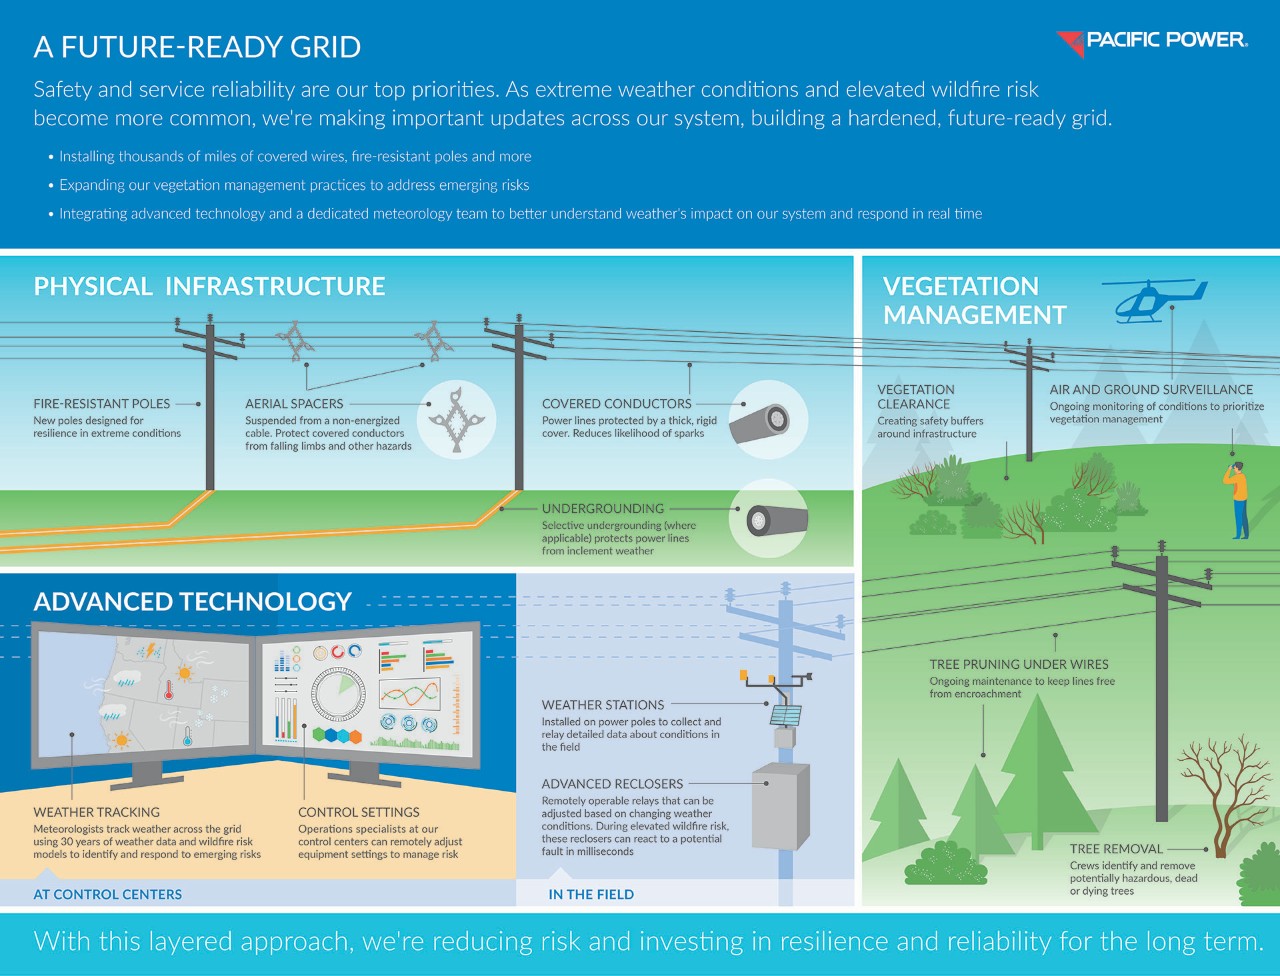 We're making important upgrades across our system to build a hardened, future-ready grid. These include investments in our physical infrastructure (poles, conductors), vegetation management and advanced weather-monitoring and control technology.